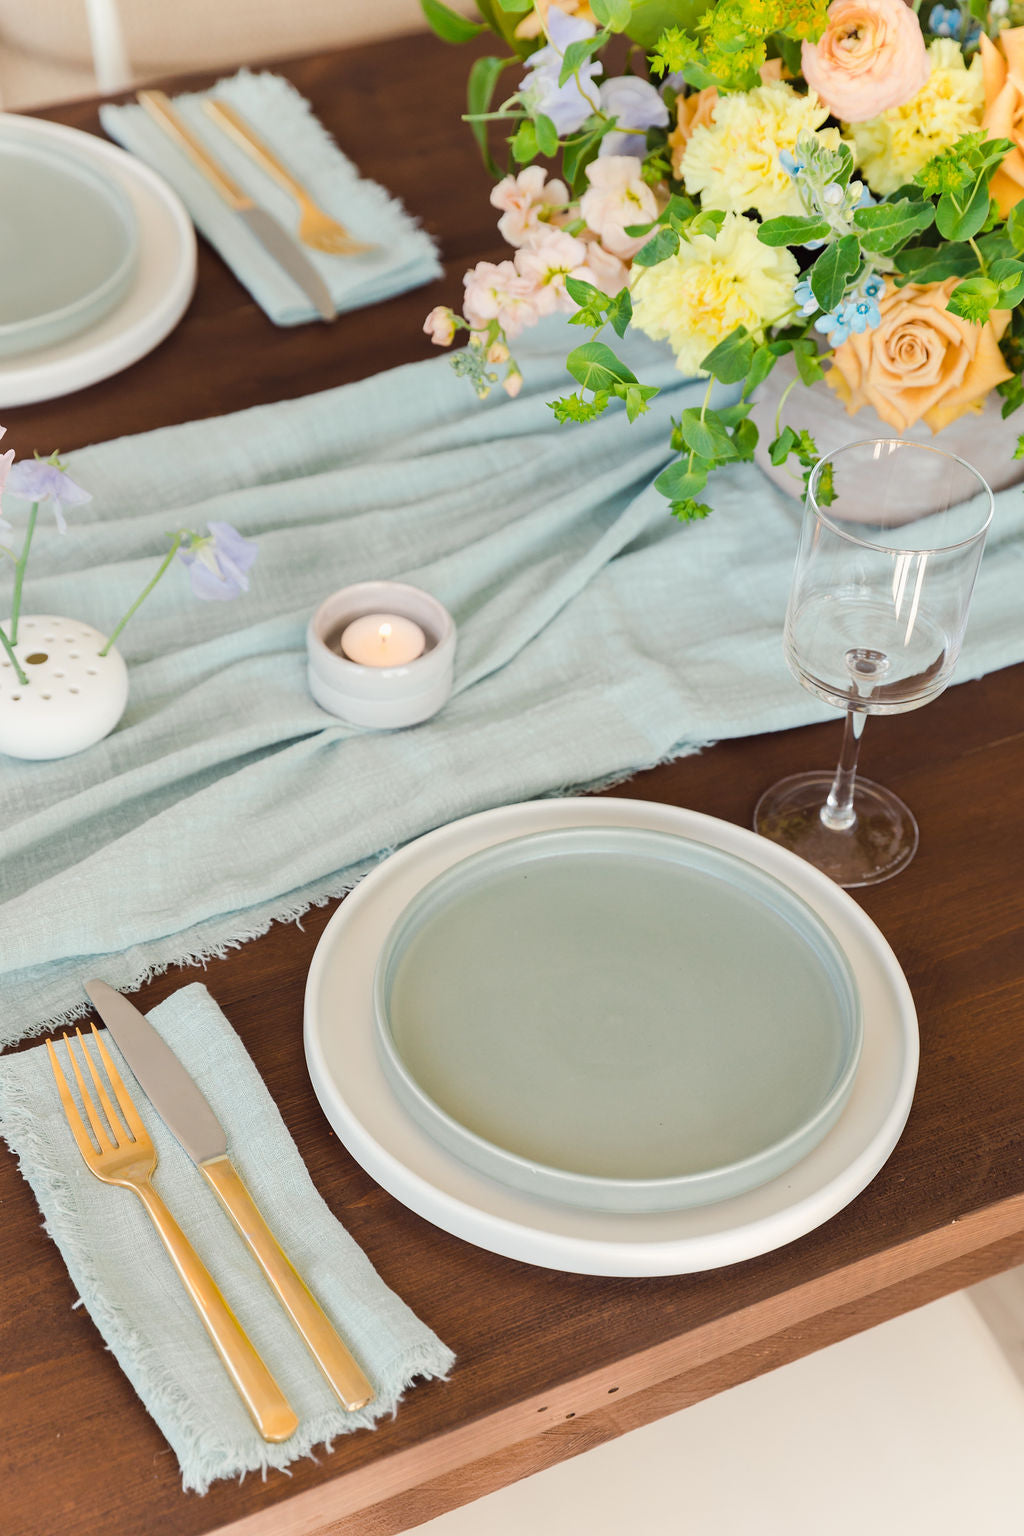 Hosting Your First Dinner Party? Here’s What You Need to Know